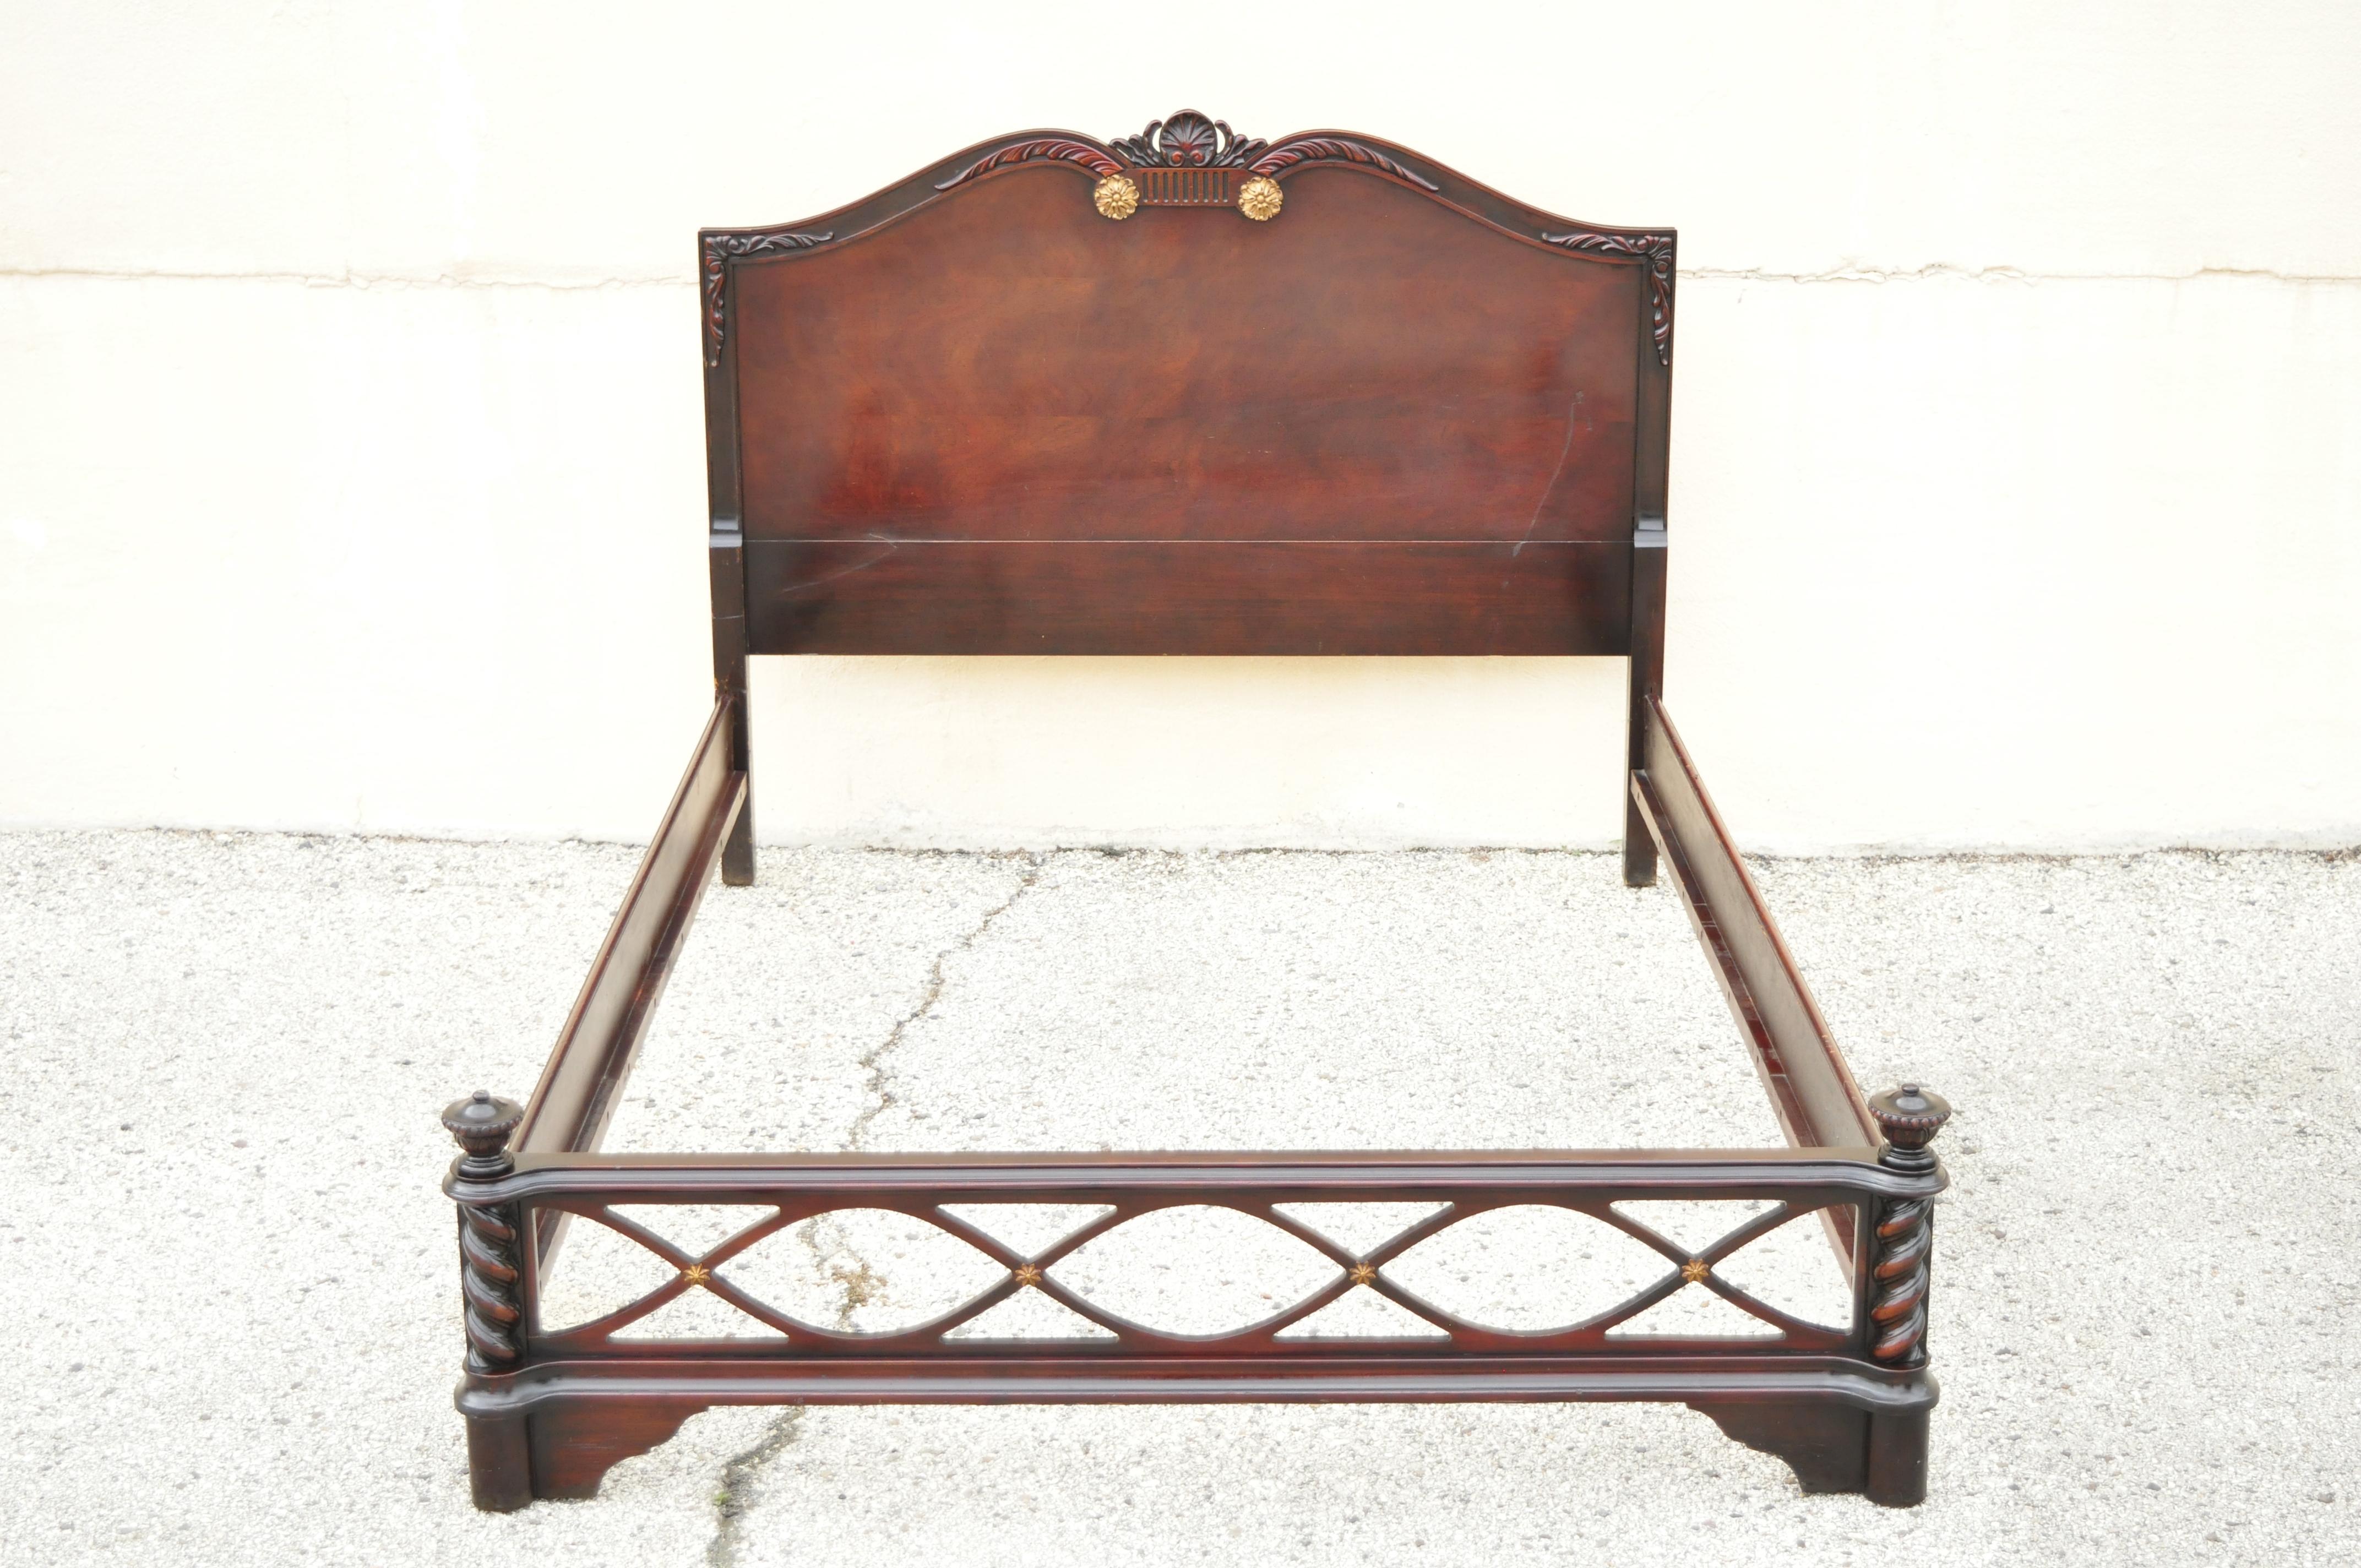 Antique mahogany Hollywood Regency full size bed frame headboard Dorothy Draper style. Item features full size frame, pierce carved x-form footboard, solid wood construction, beautiful wood grain, nicely carved details, very nice antique item, great